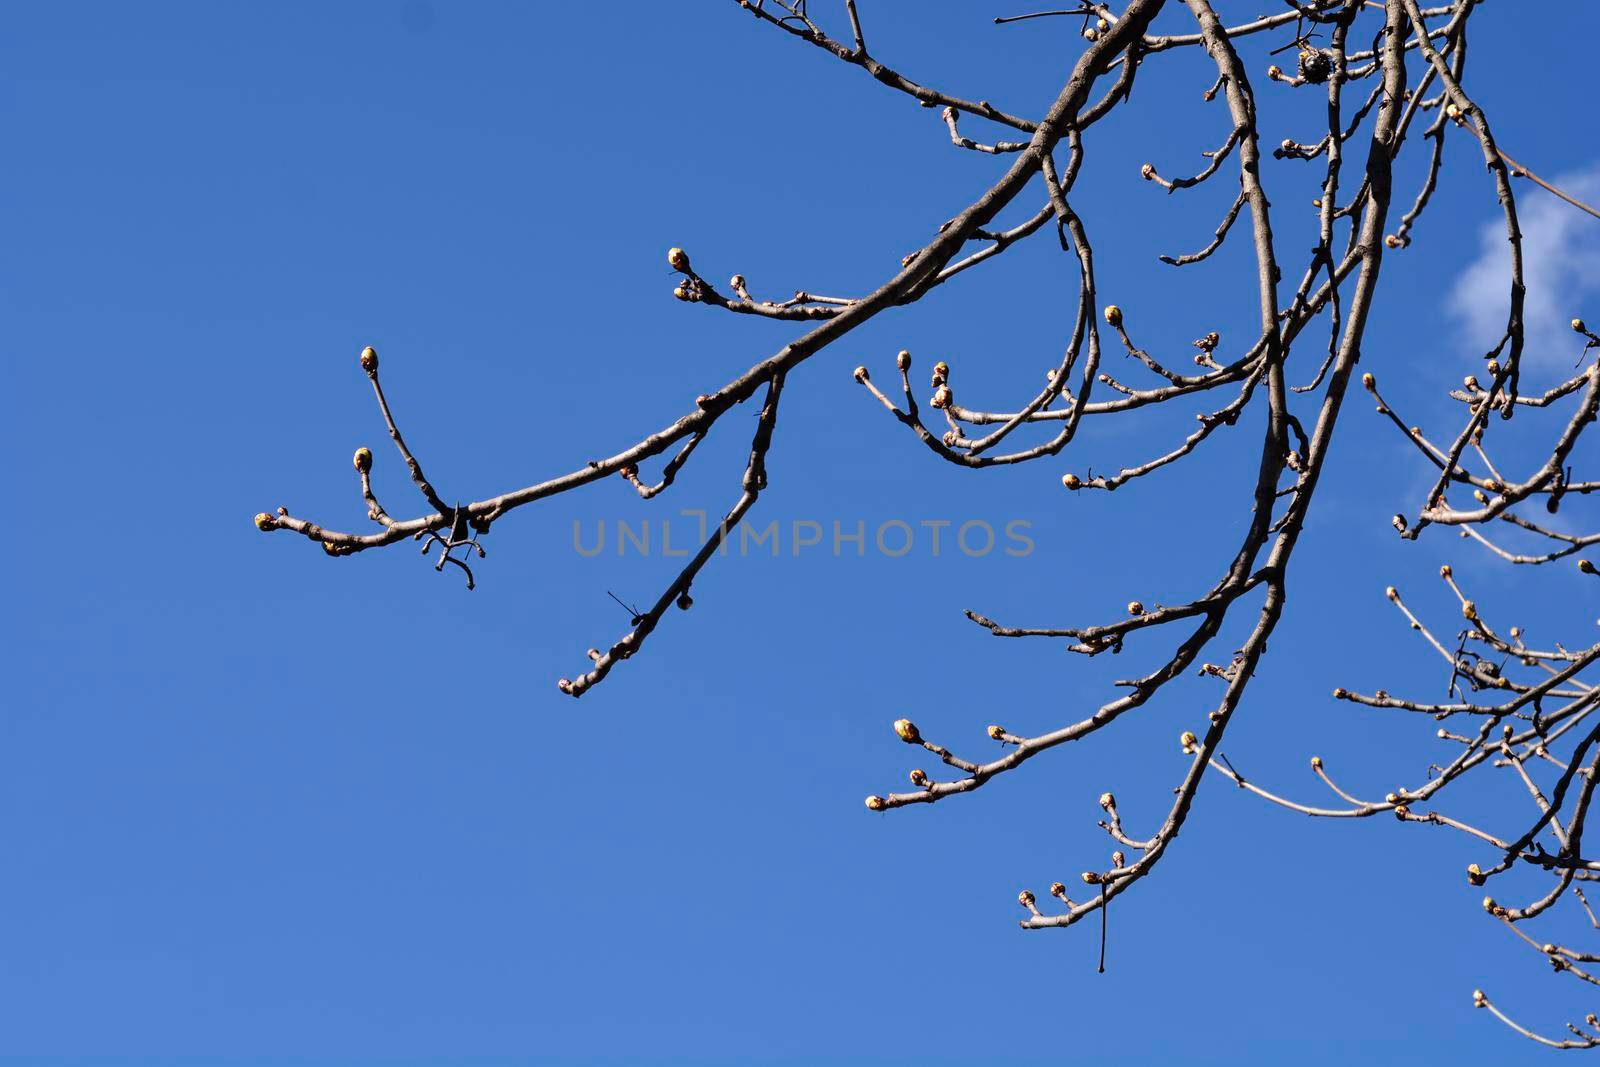 Common horse chestnut branches with leaf buds - Latin name - Aesculus hippocastanum